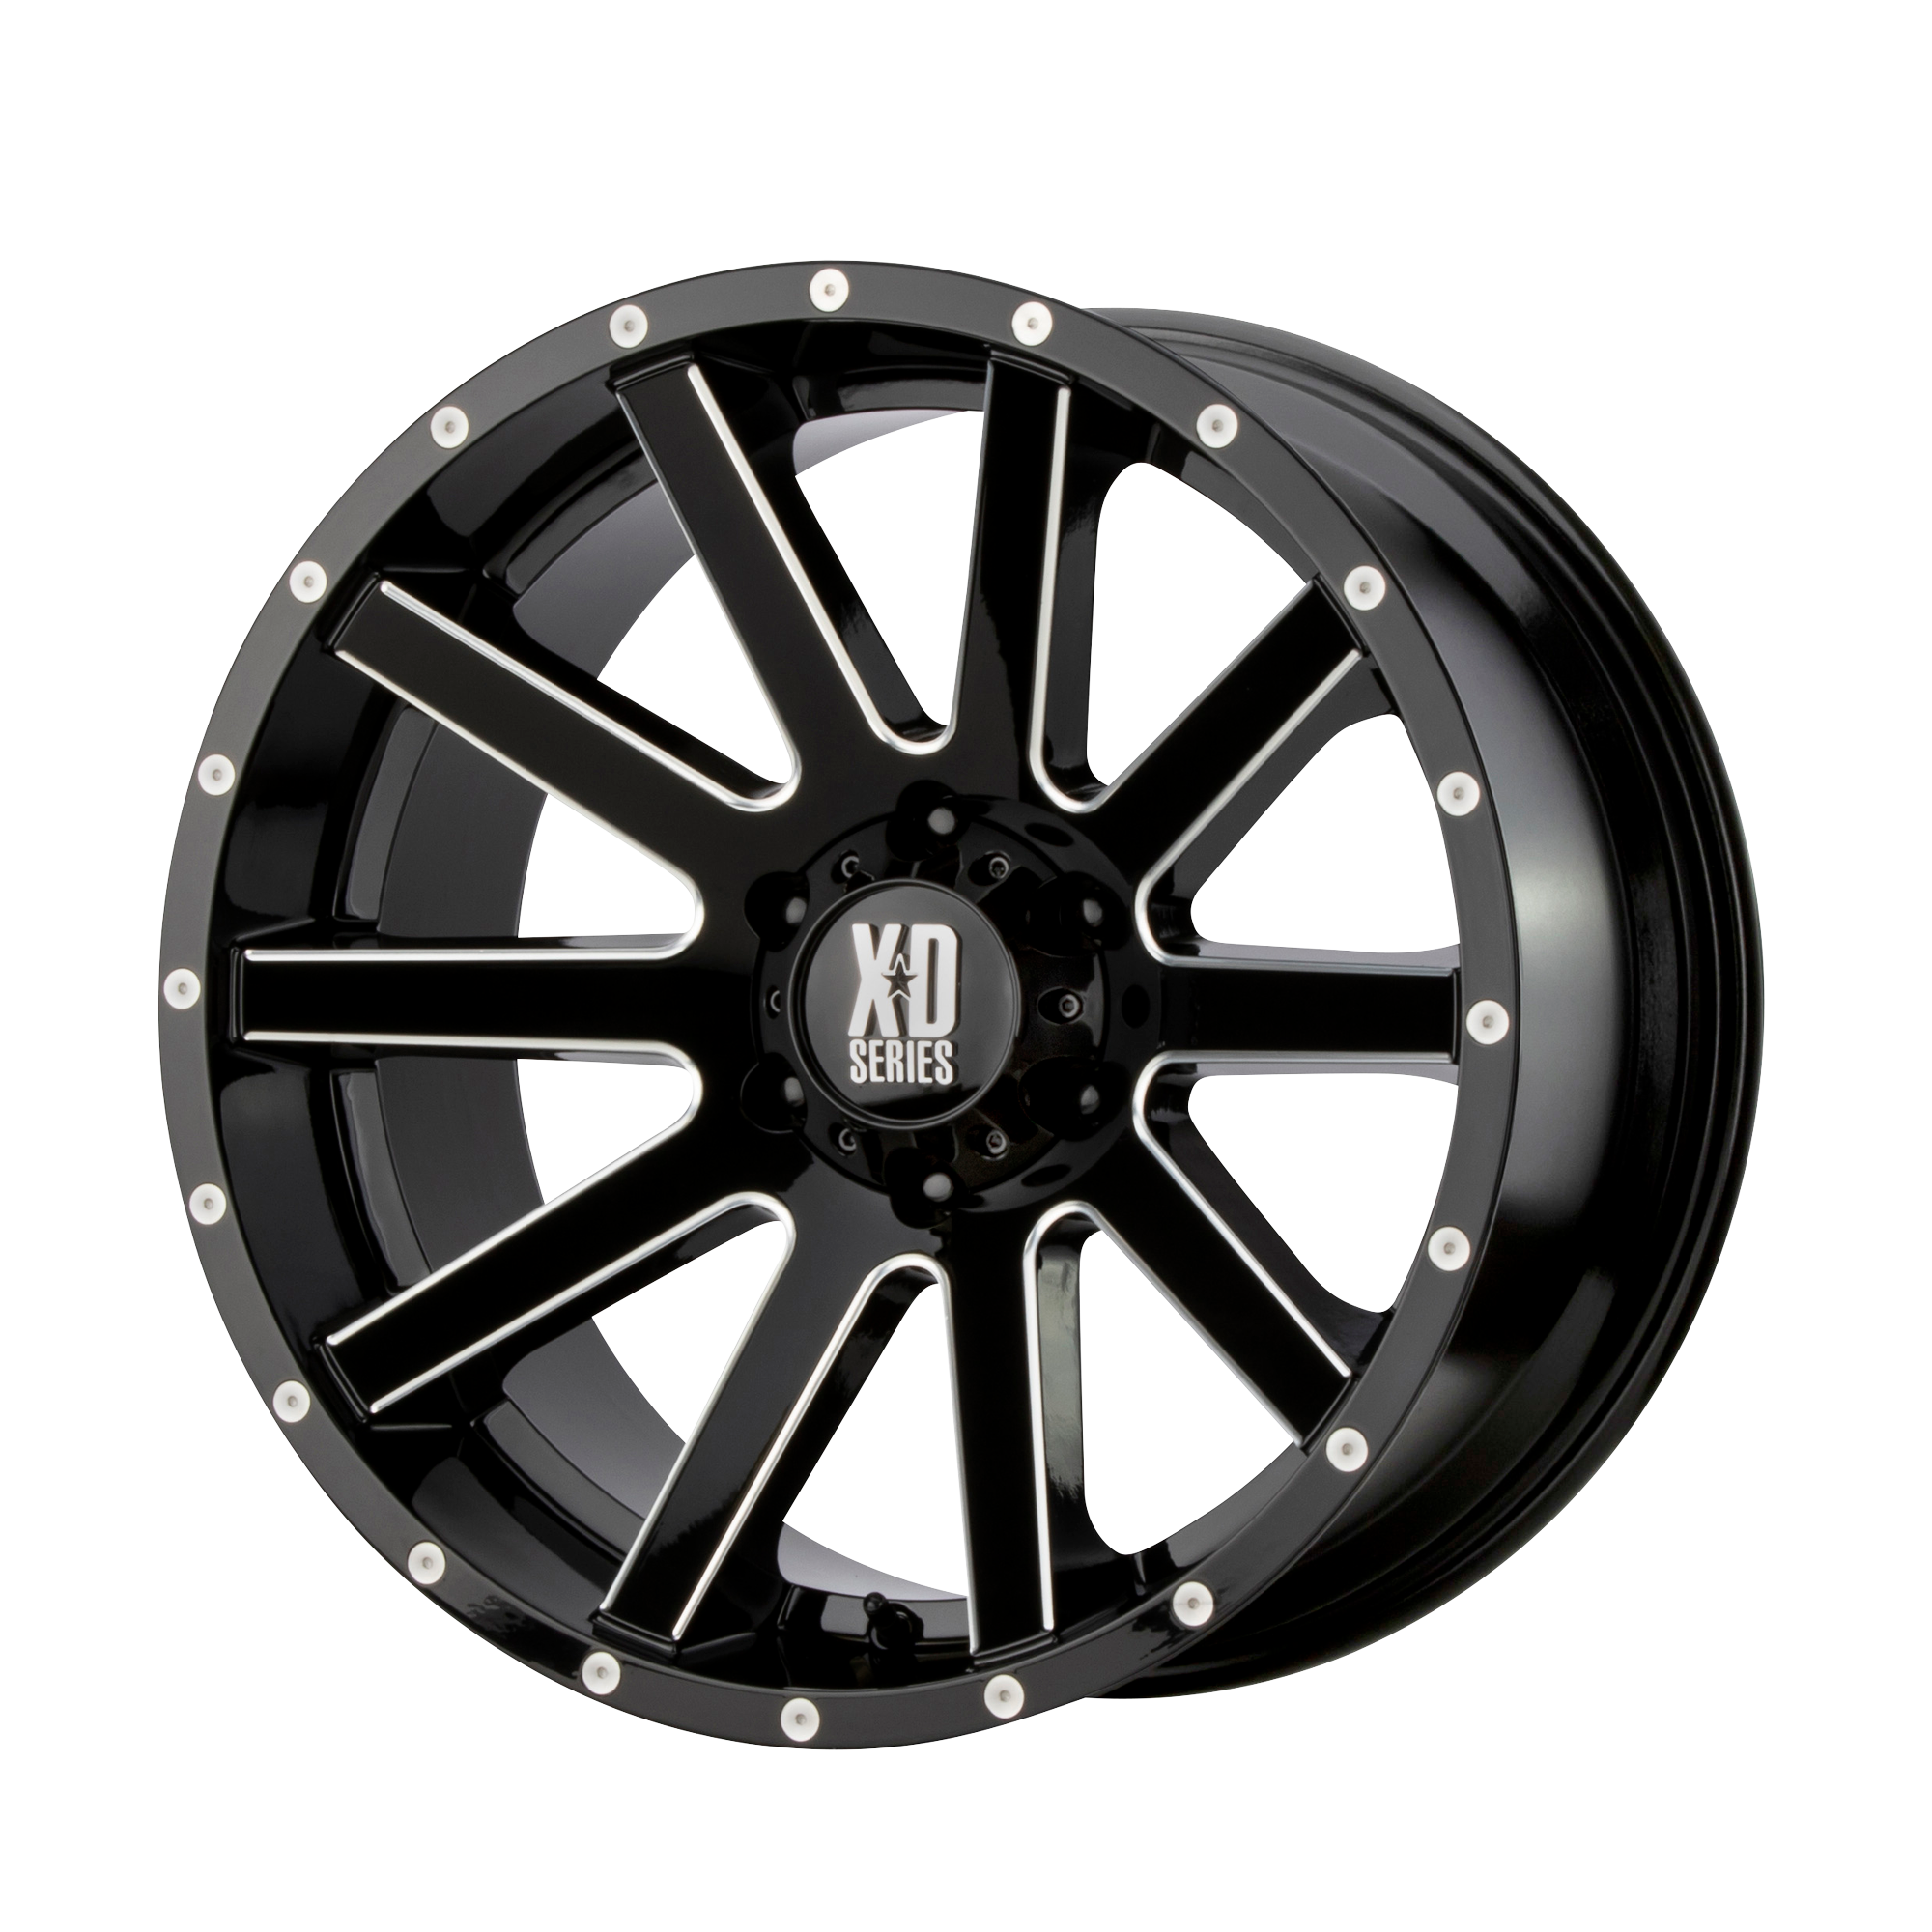 HEIST 20x9 6x135.00 GLOSS BLACK MILLED (18 mm) - Tires and Engine Performance